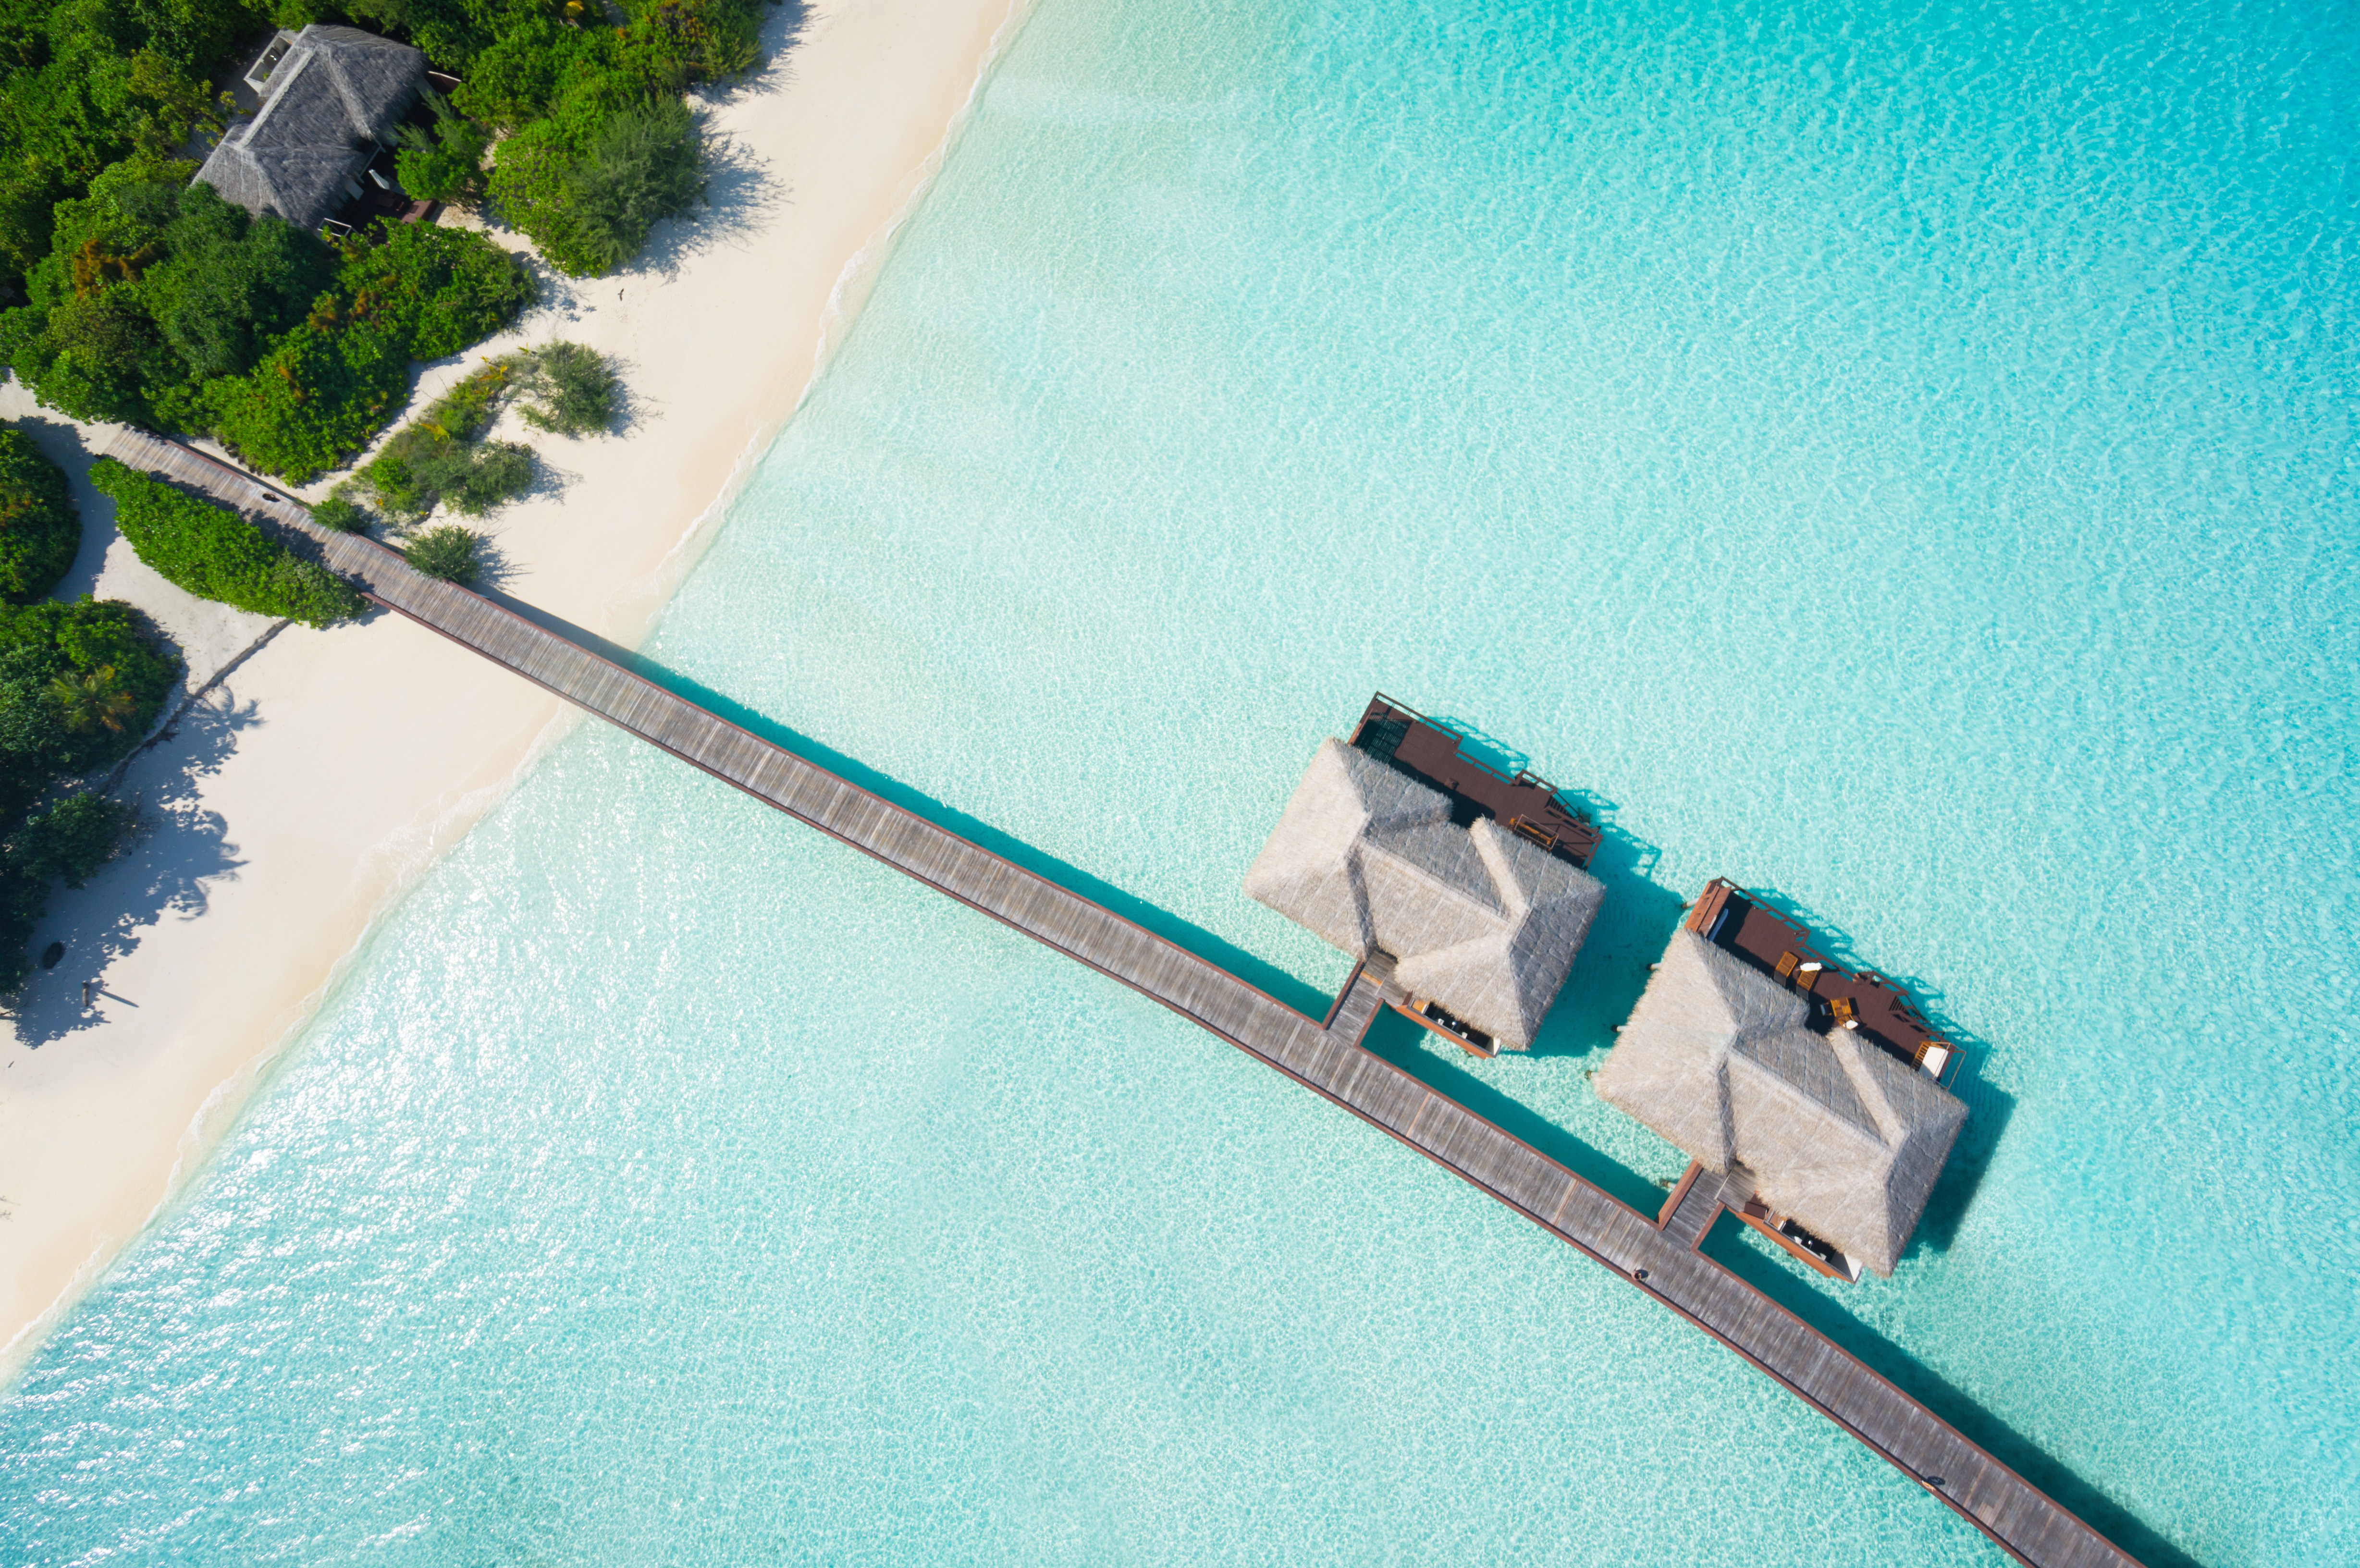 Tropical hideaway from above | Source: Getty Images